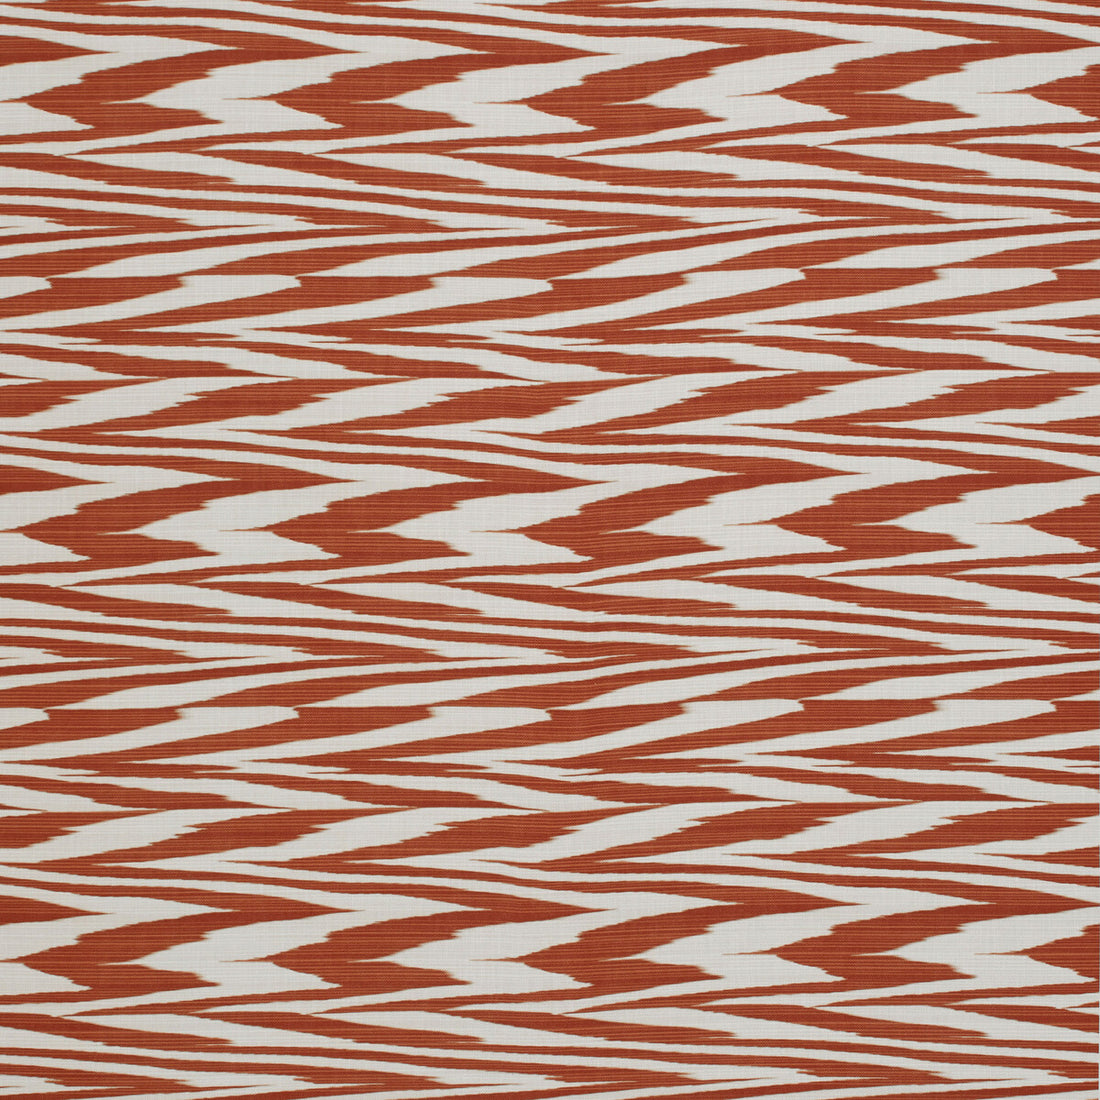 Atacama Outdoor fabric in 591 color - pattern 36156.12.0 - by Kravet Couture in the Missoni Home 2021 collection